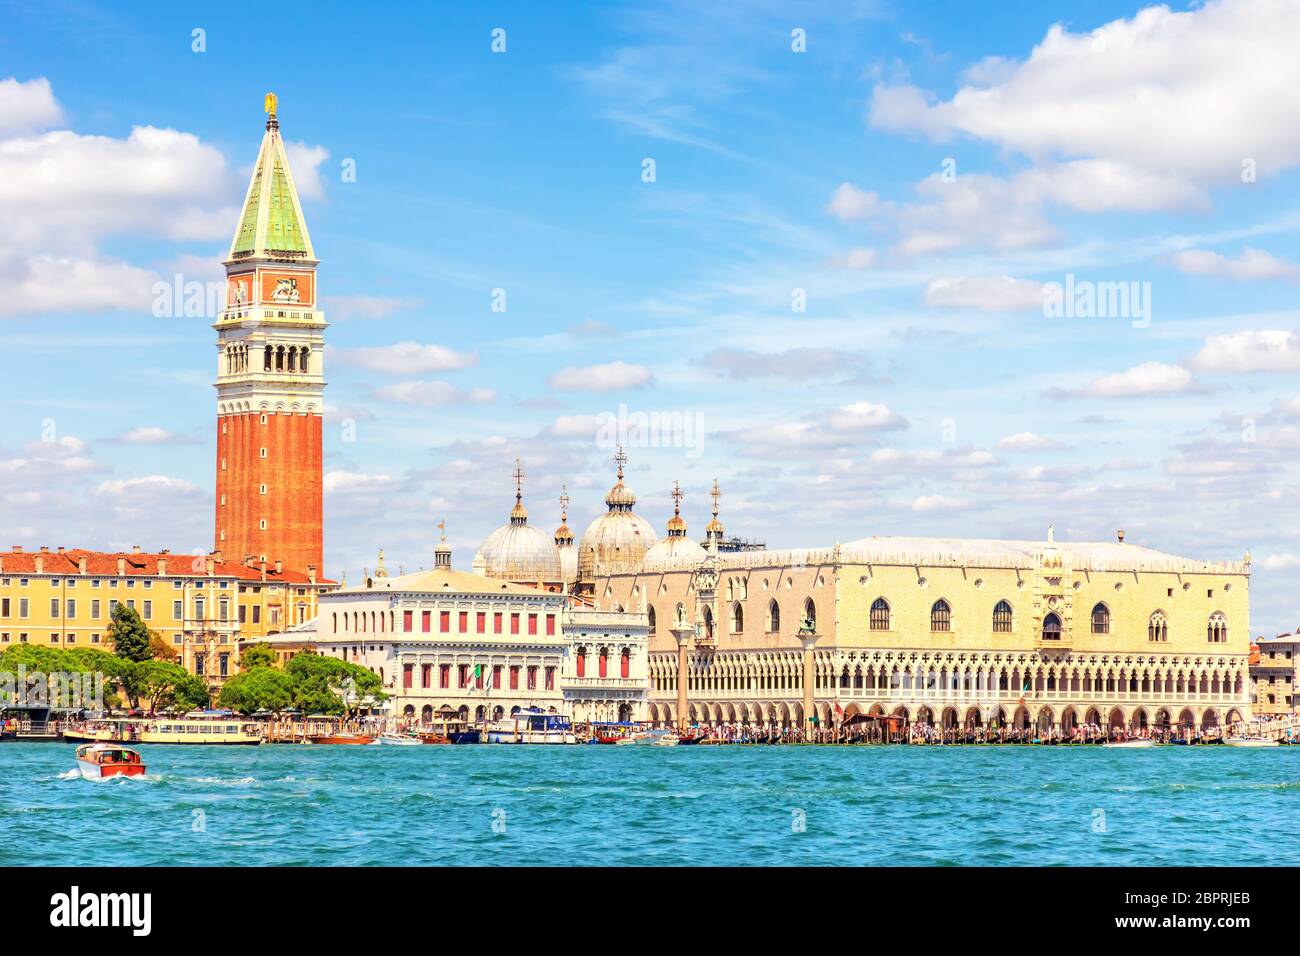 Piazza San Marco and Doge's Palace, view from the lagoon, Venice, Italy. Stock Photo